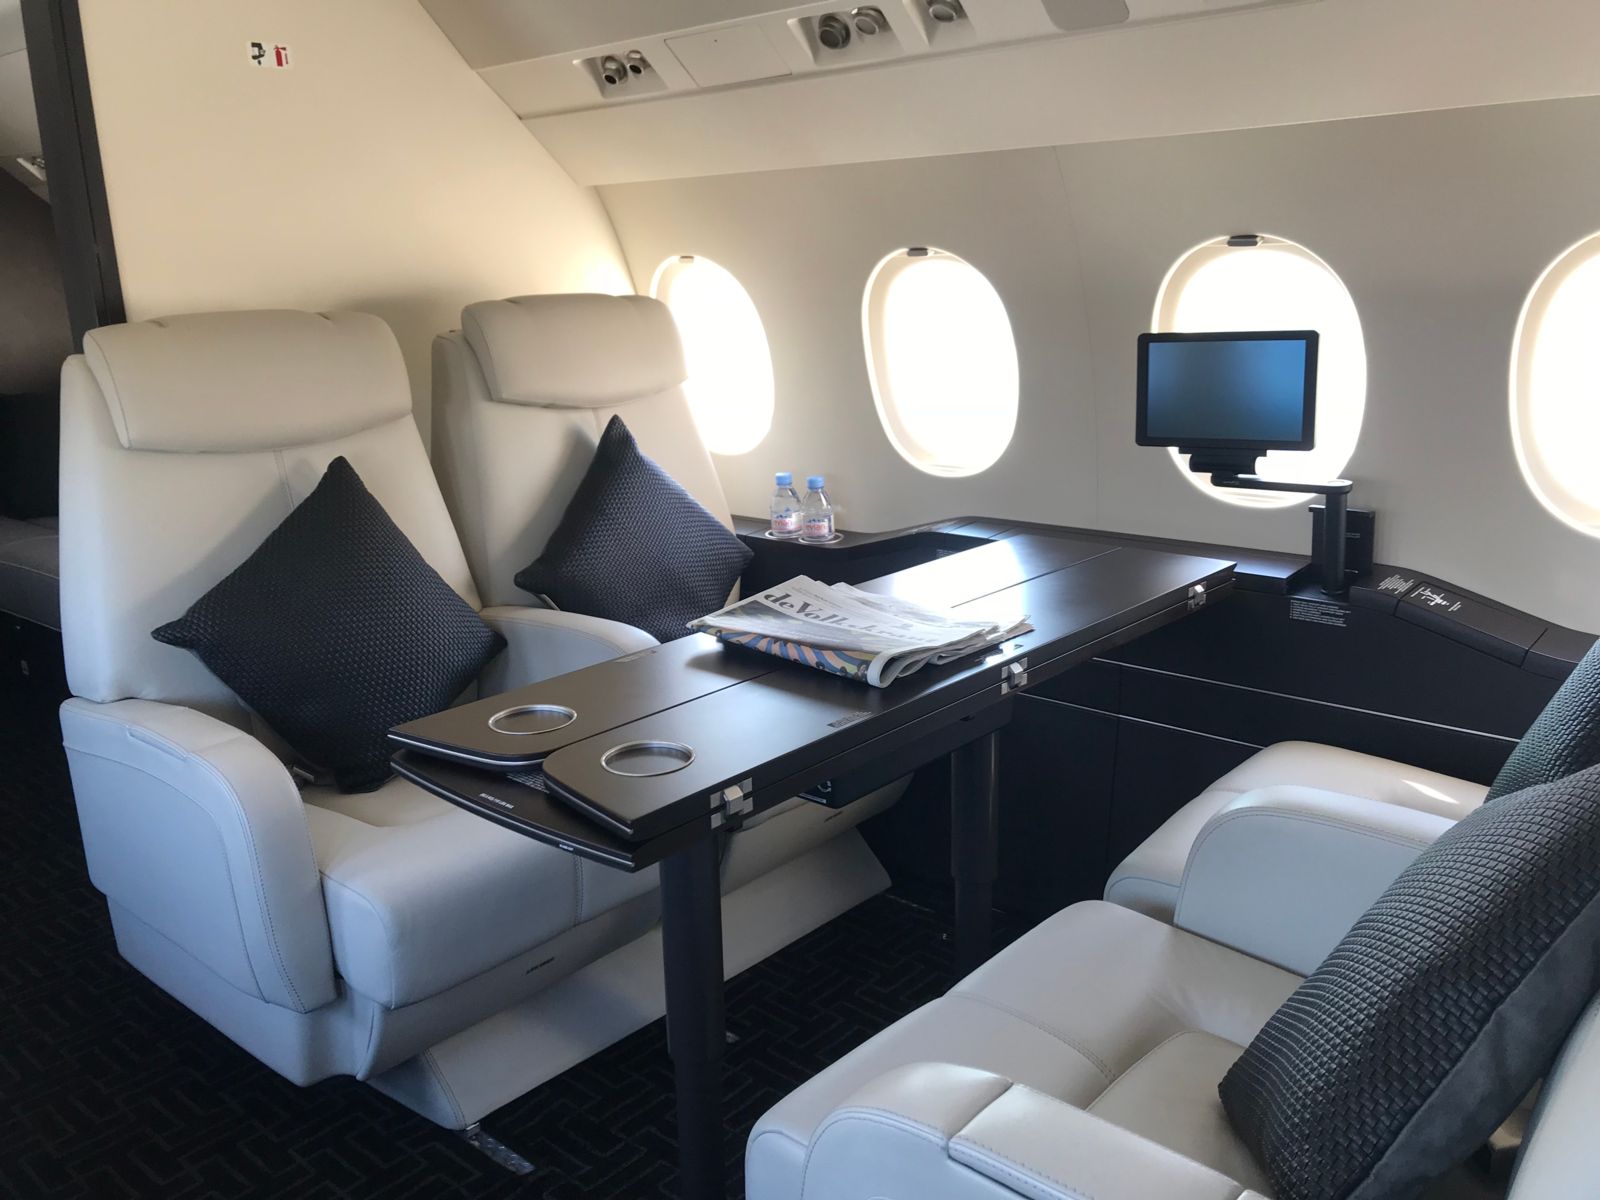 Dassault Falcon 900LX  S/N 288 for sale | gallery image: /userfiles/images/F900LX%20SN%20288/club.jpg